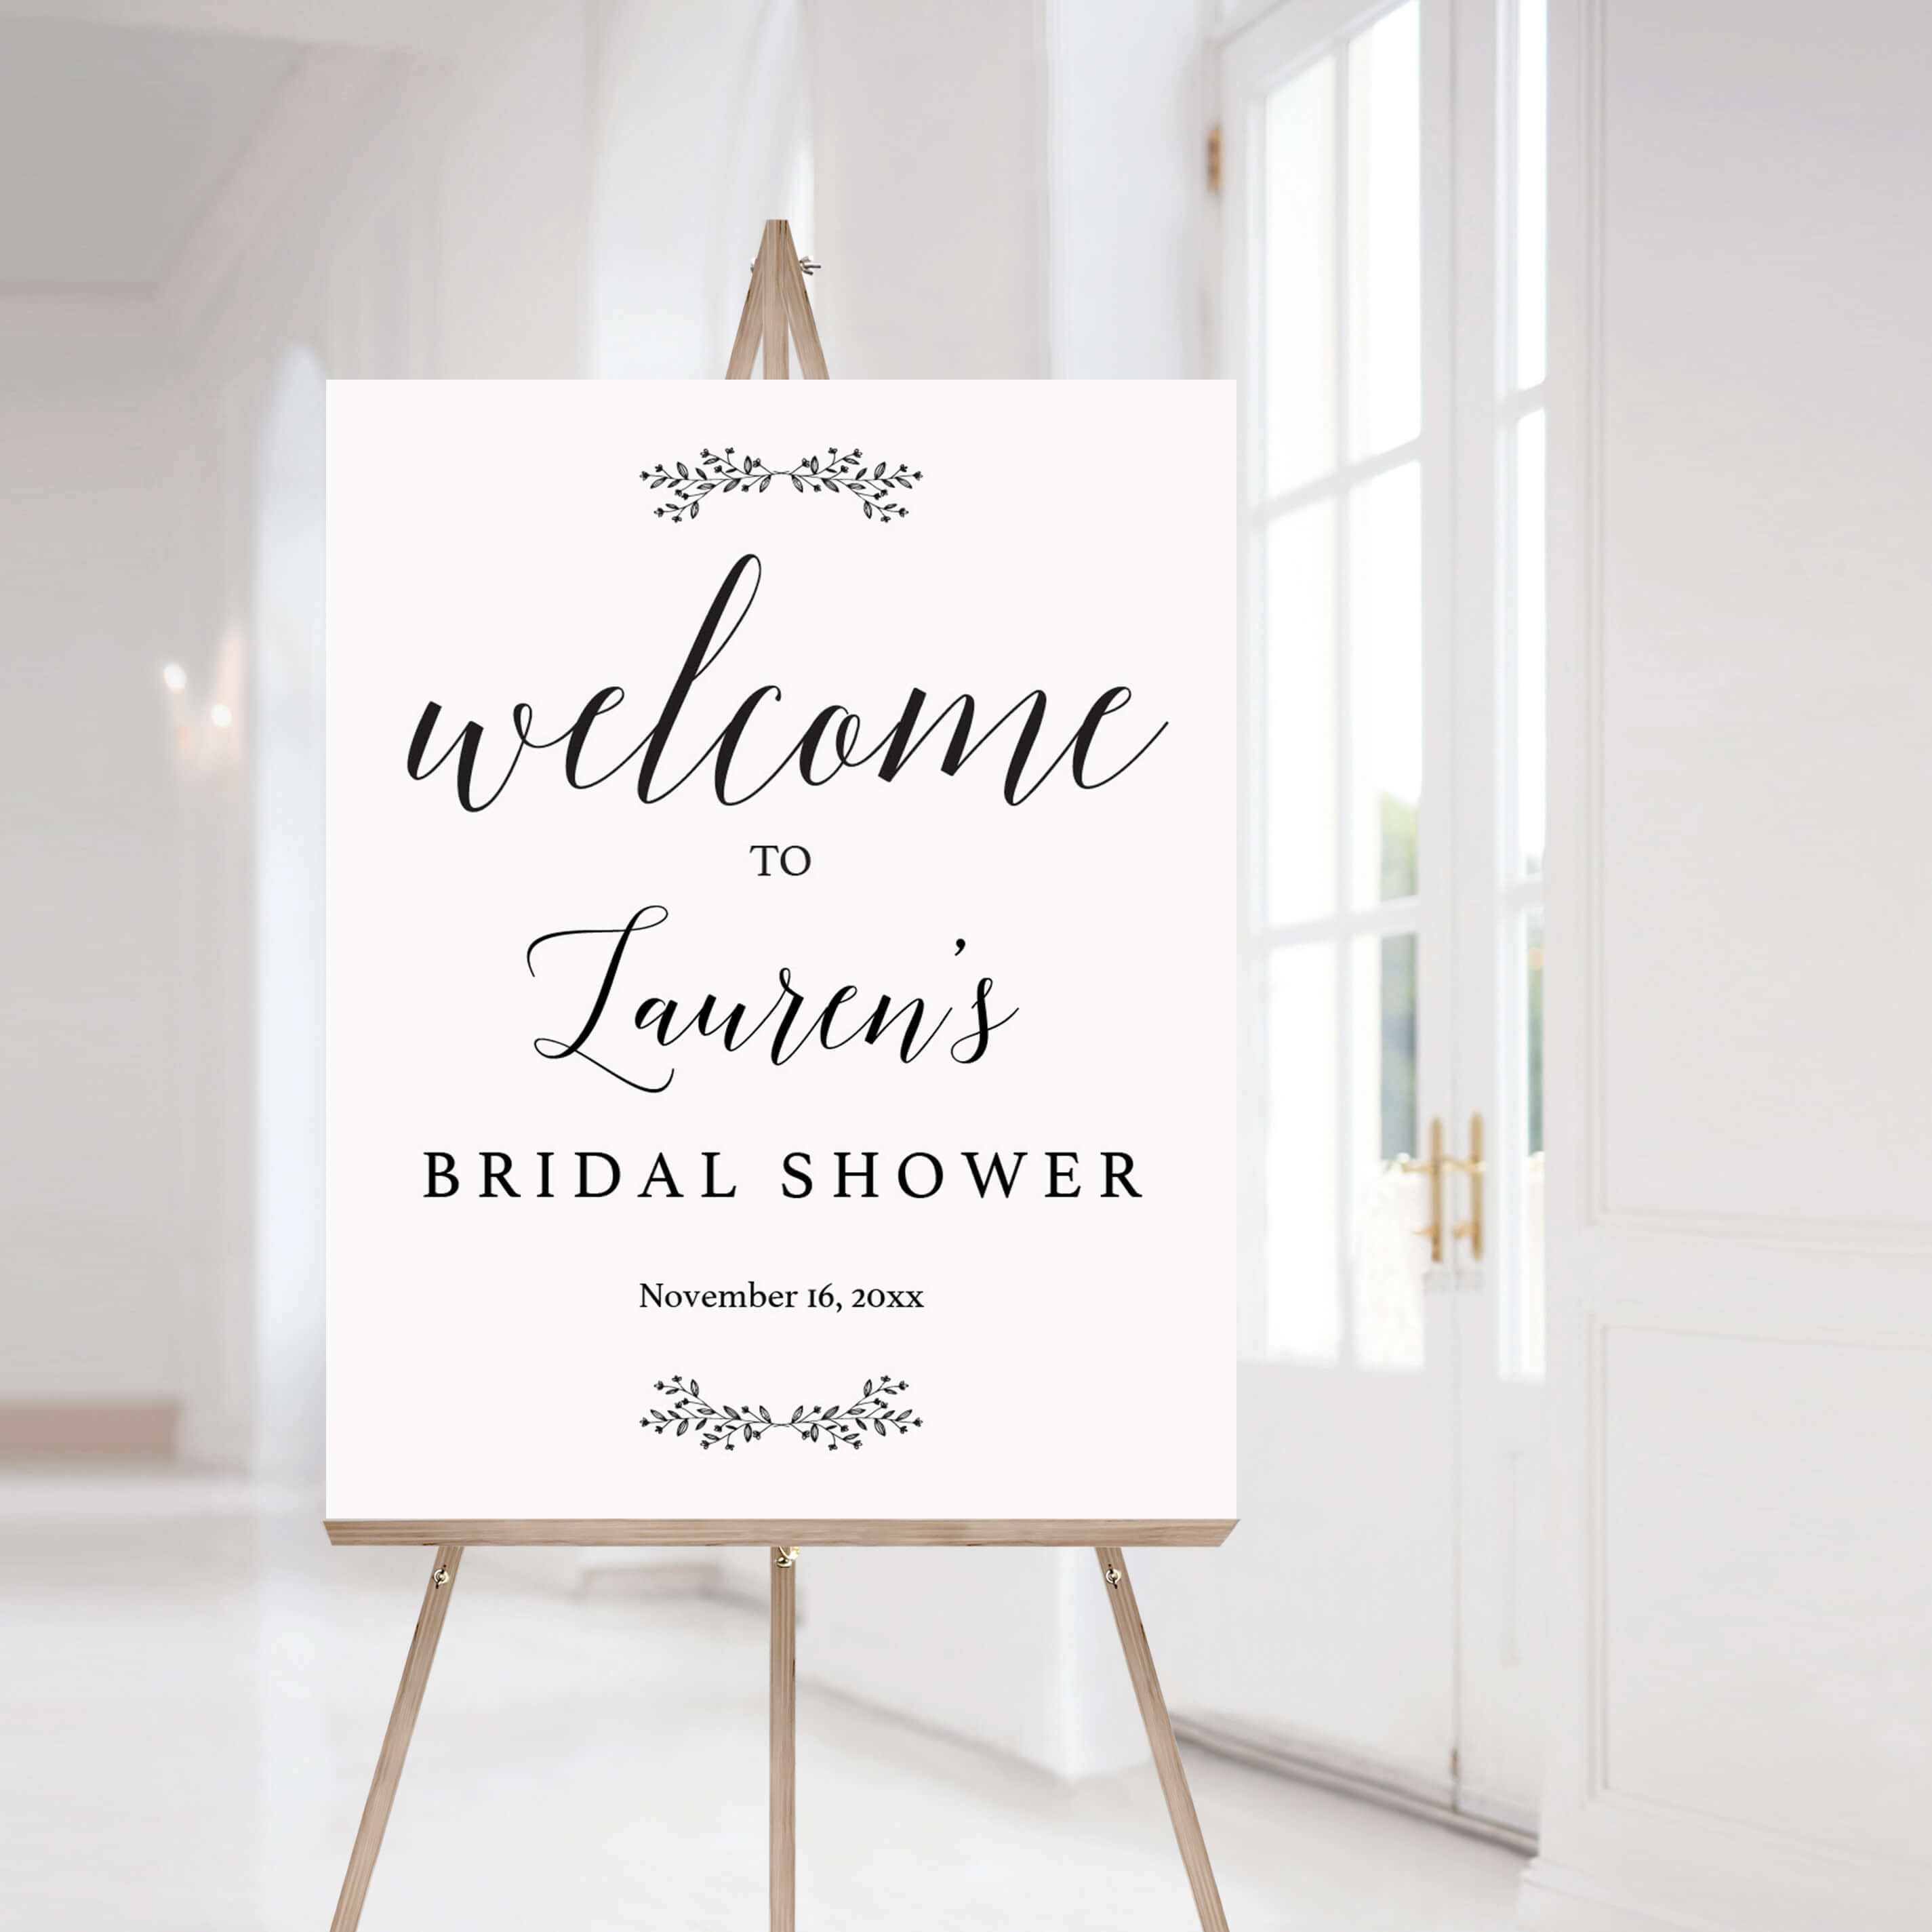 Rustic Bridal Shower Welcome Sign Template by LittleSizzle